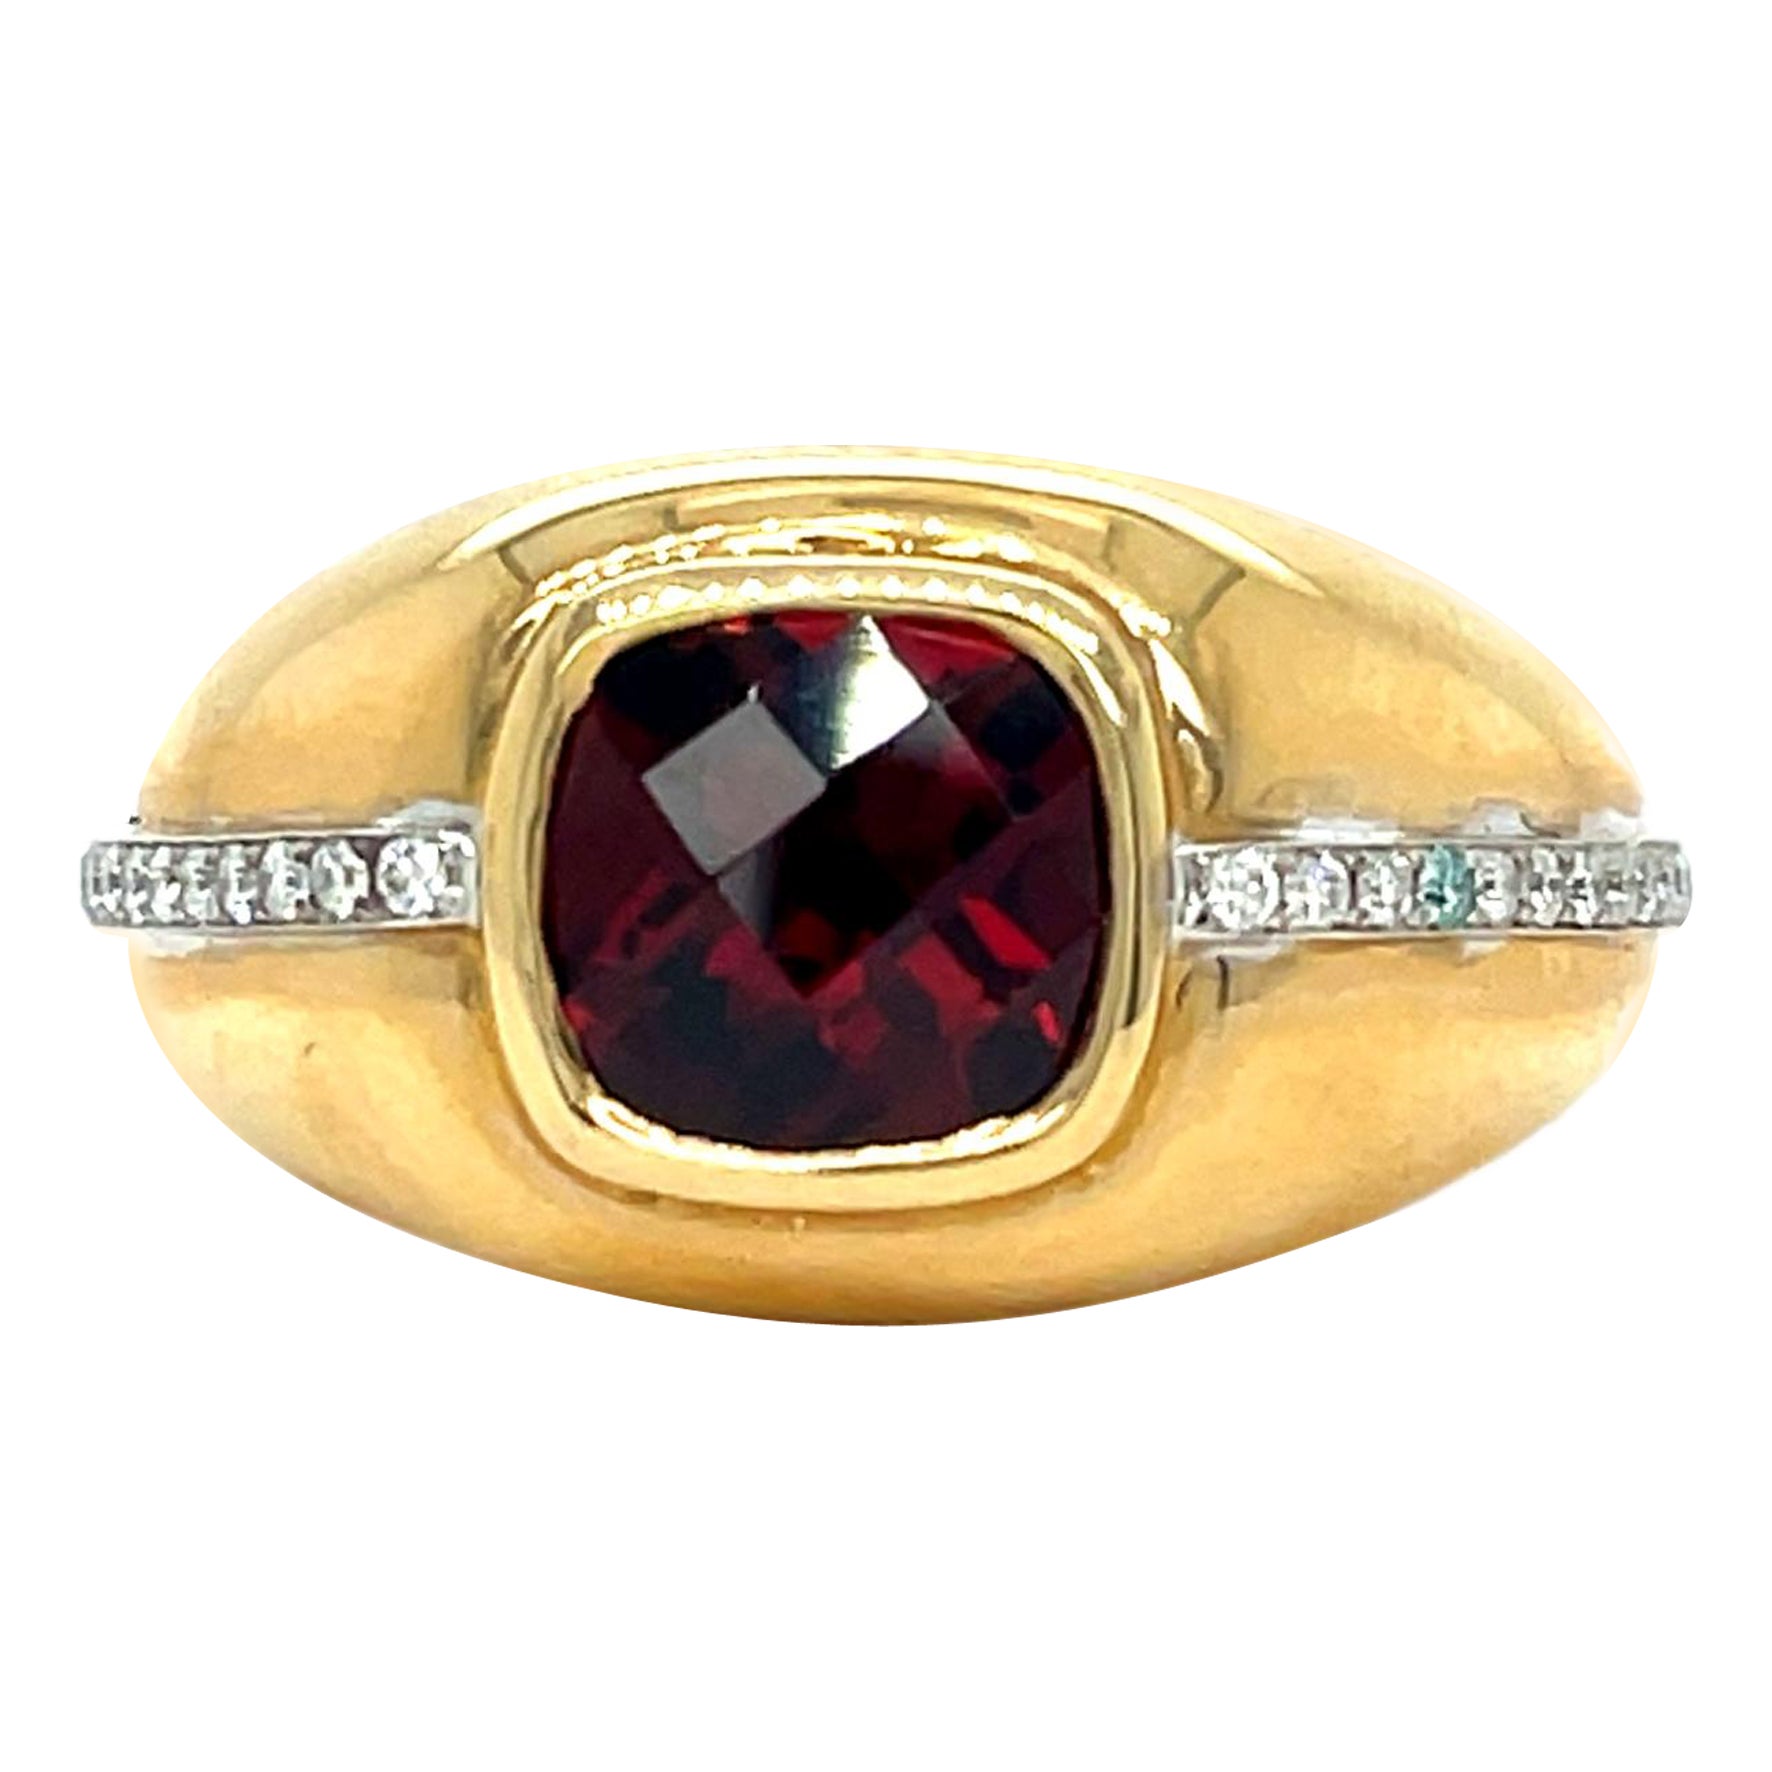 Men's Checkerboard Cushion Garnet and Diamond Ring in 14KY Gold 